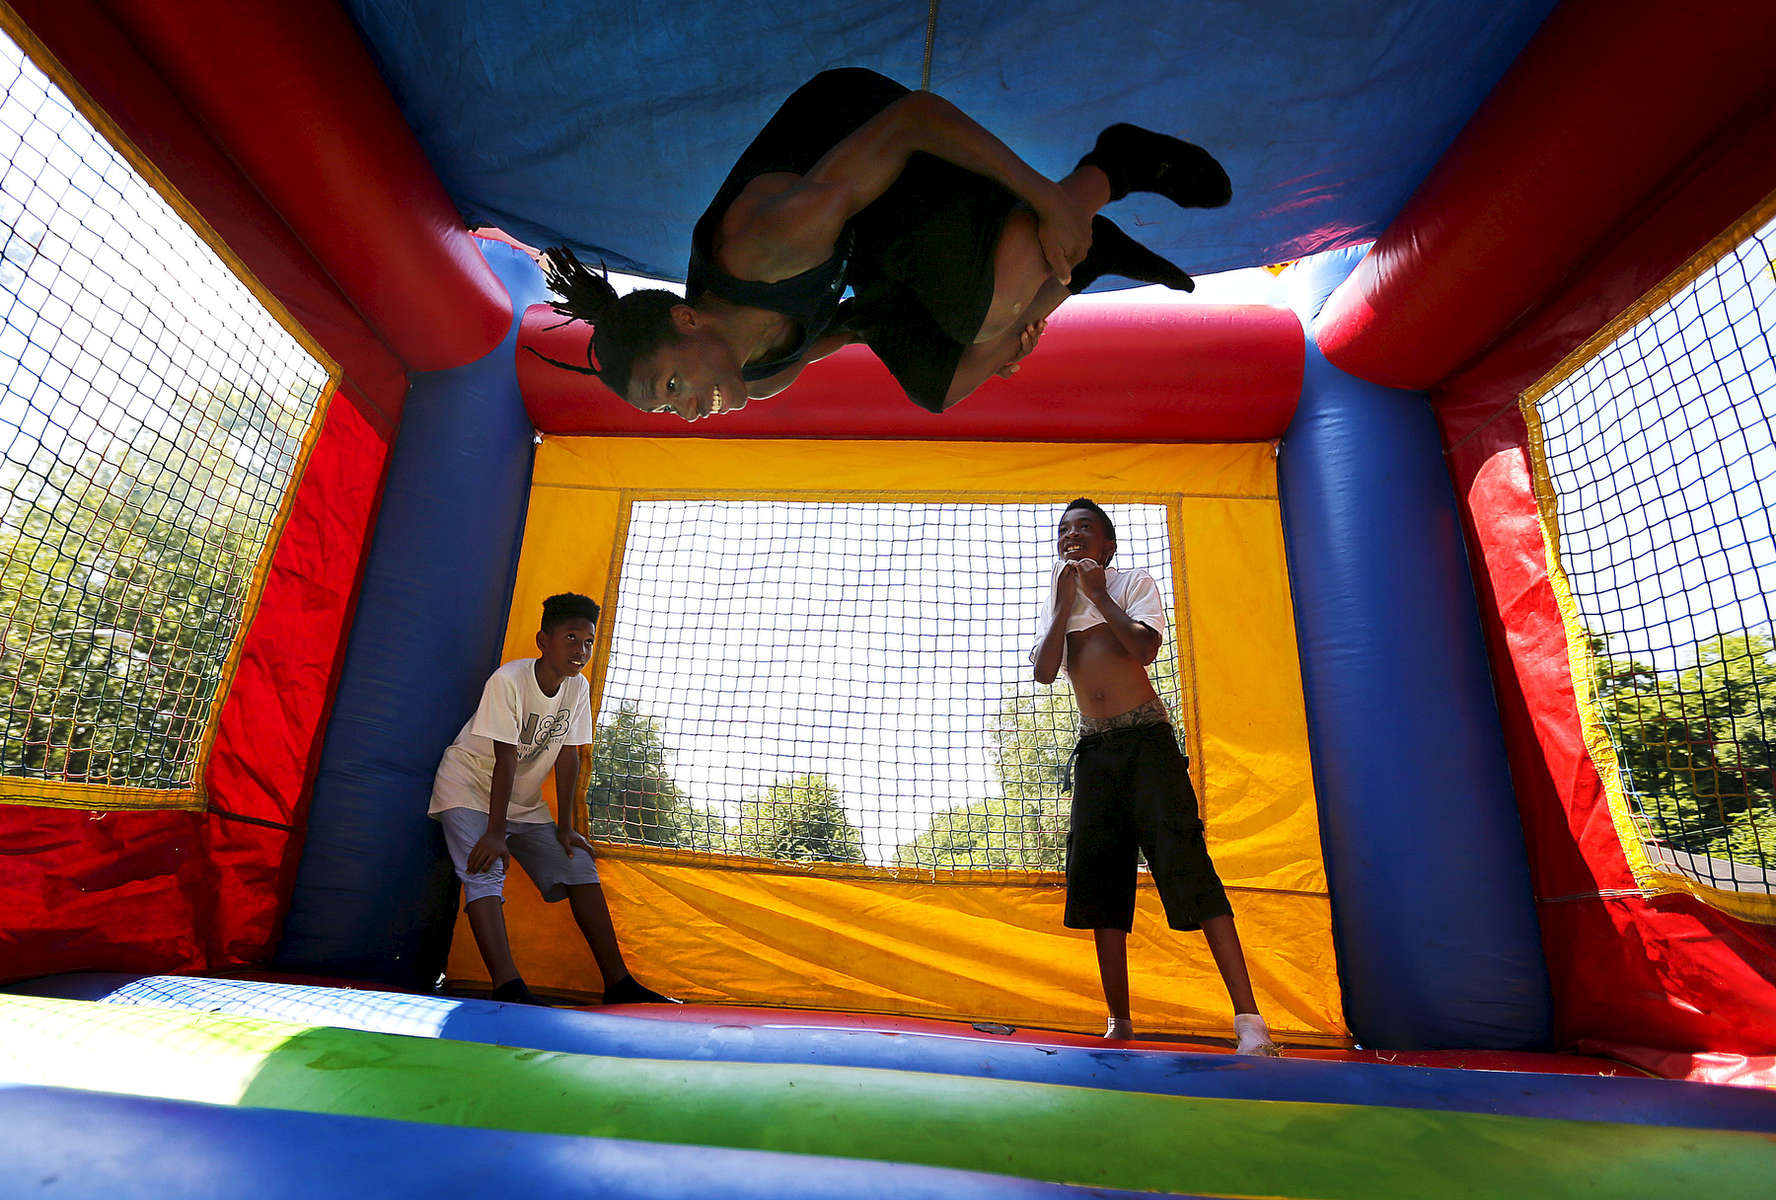 July 18, 2016 - Jim Brown (center), 15, flips inside a bounce house as Martekuz Harris (left), 12, and Jevon Jones, 11, look on during a {quote}Not in My Neighborhood{quote} block party hosted by DeAndre Brown and LifeLine 2 Success. The gathering took place down the street from where a 19-year-old was murdered on the 3500 block of Gowan, as a way to speak out against violence in the community. (Mike Brown/The Commercial Appeal)